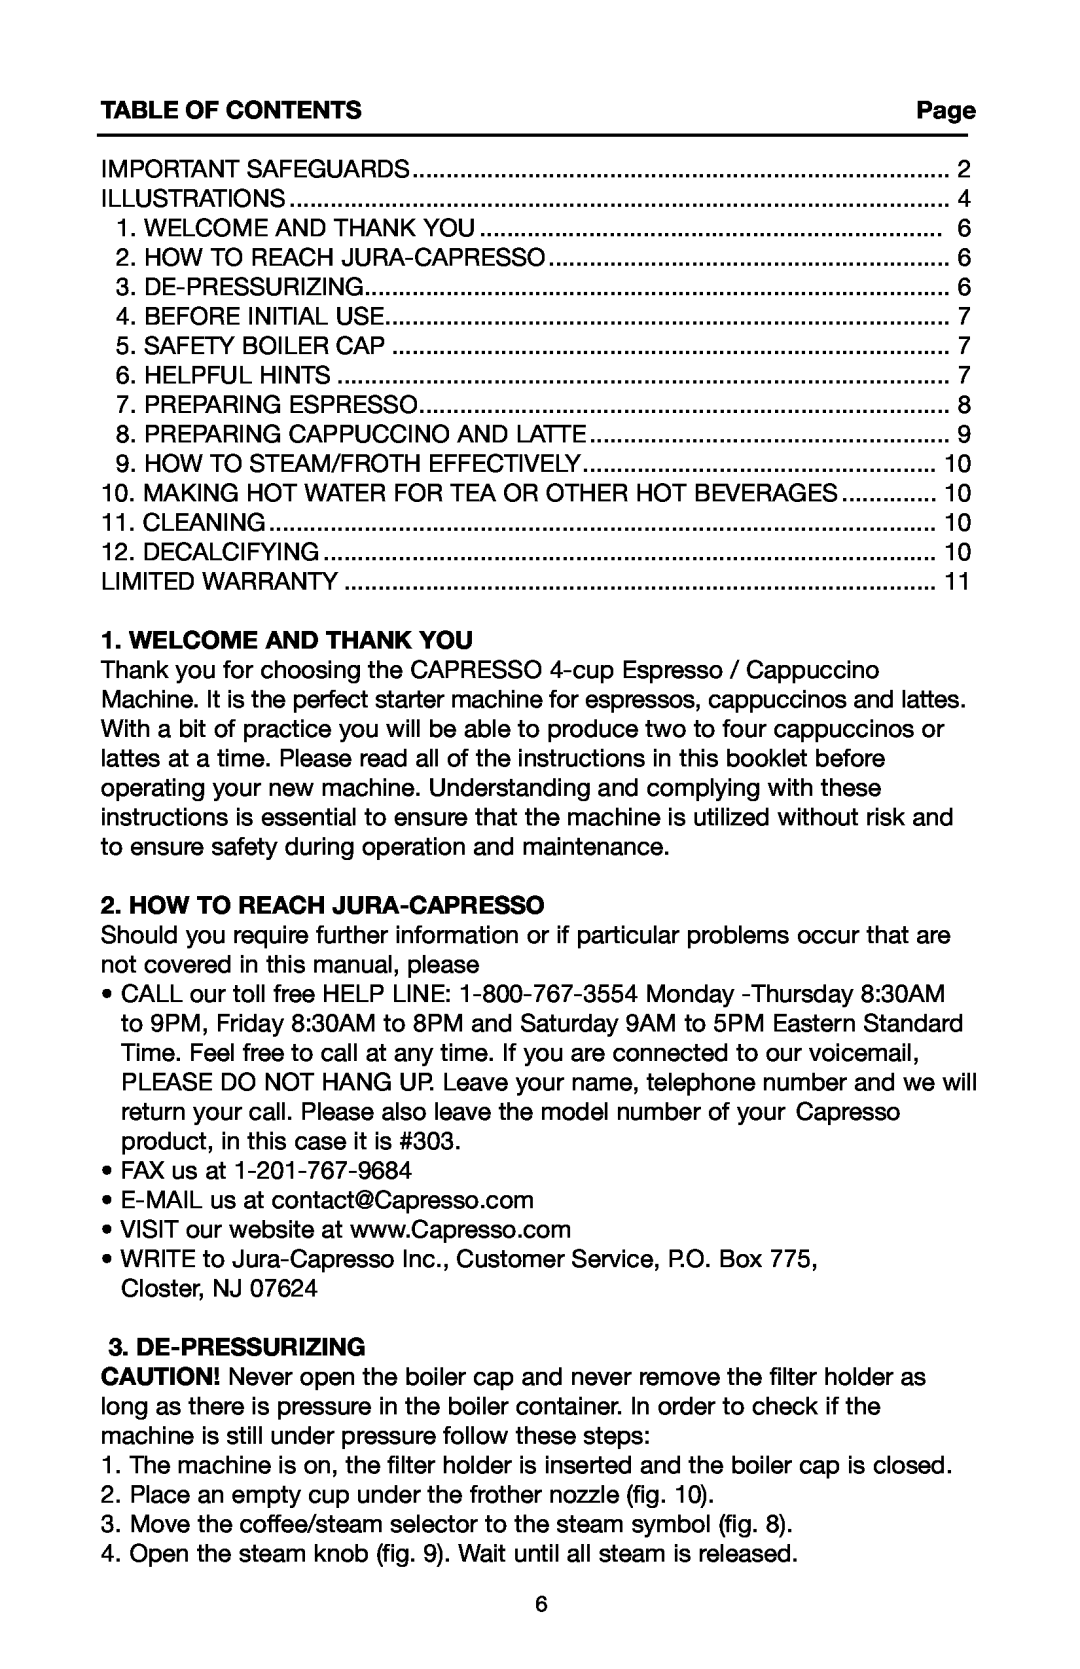 Capresso #303 warranty Table Of Contents, Page, Welcome And Thank You, How To Reach Jura-Capresso, De-Pressurizing 